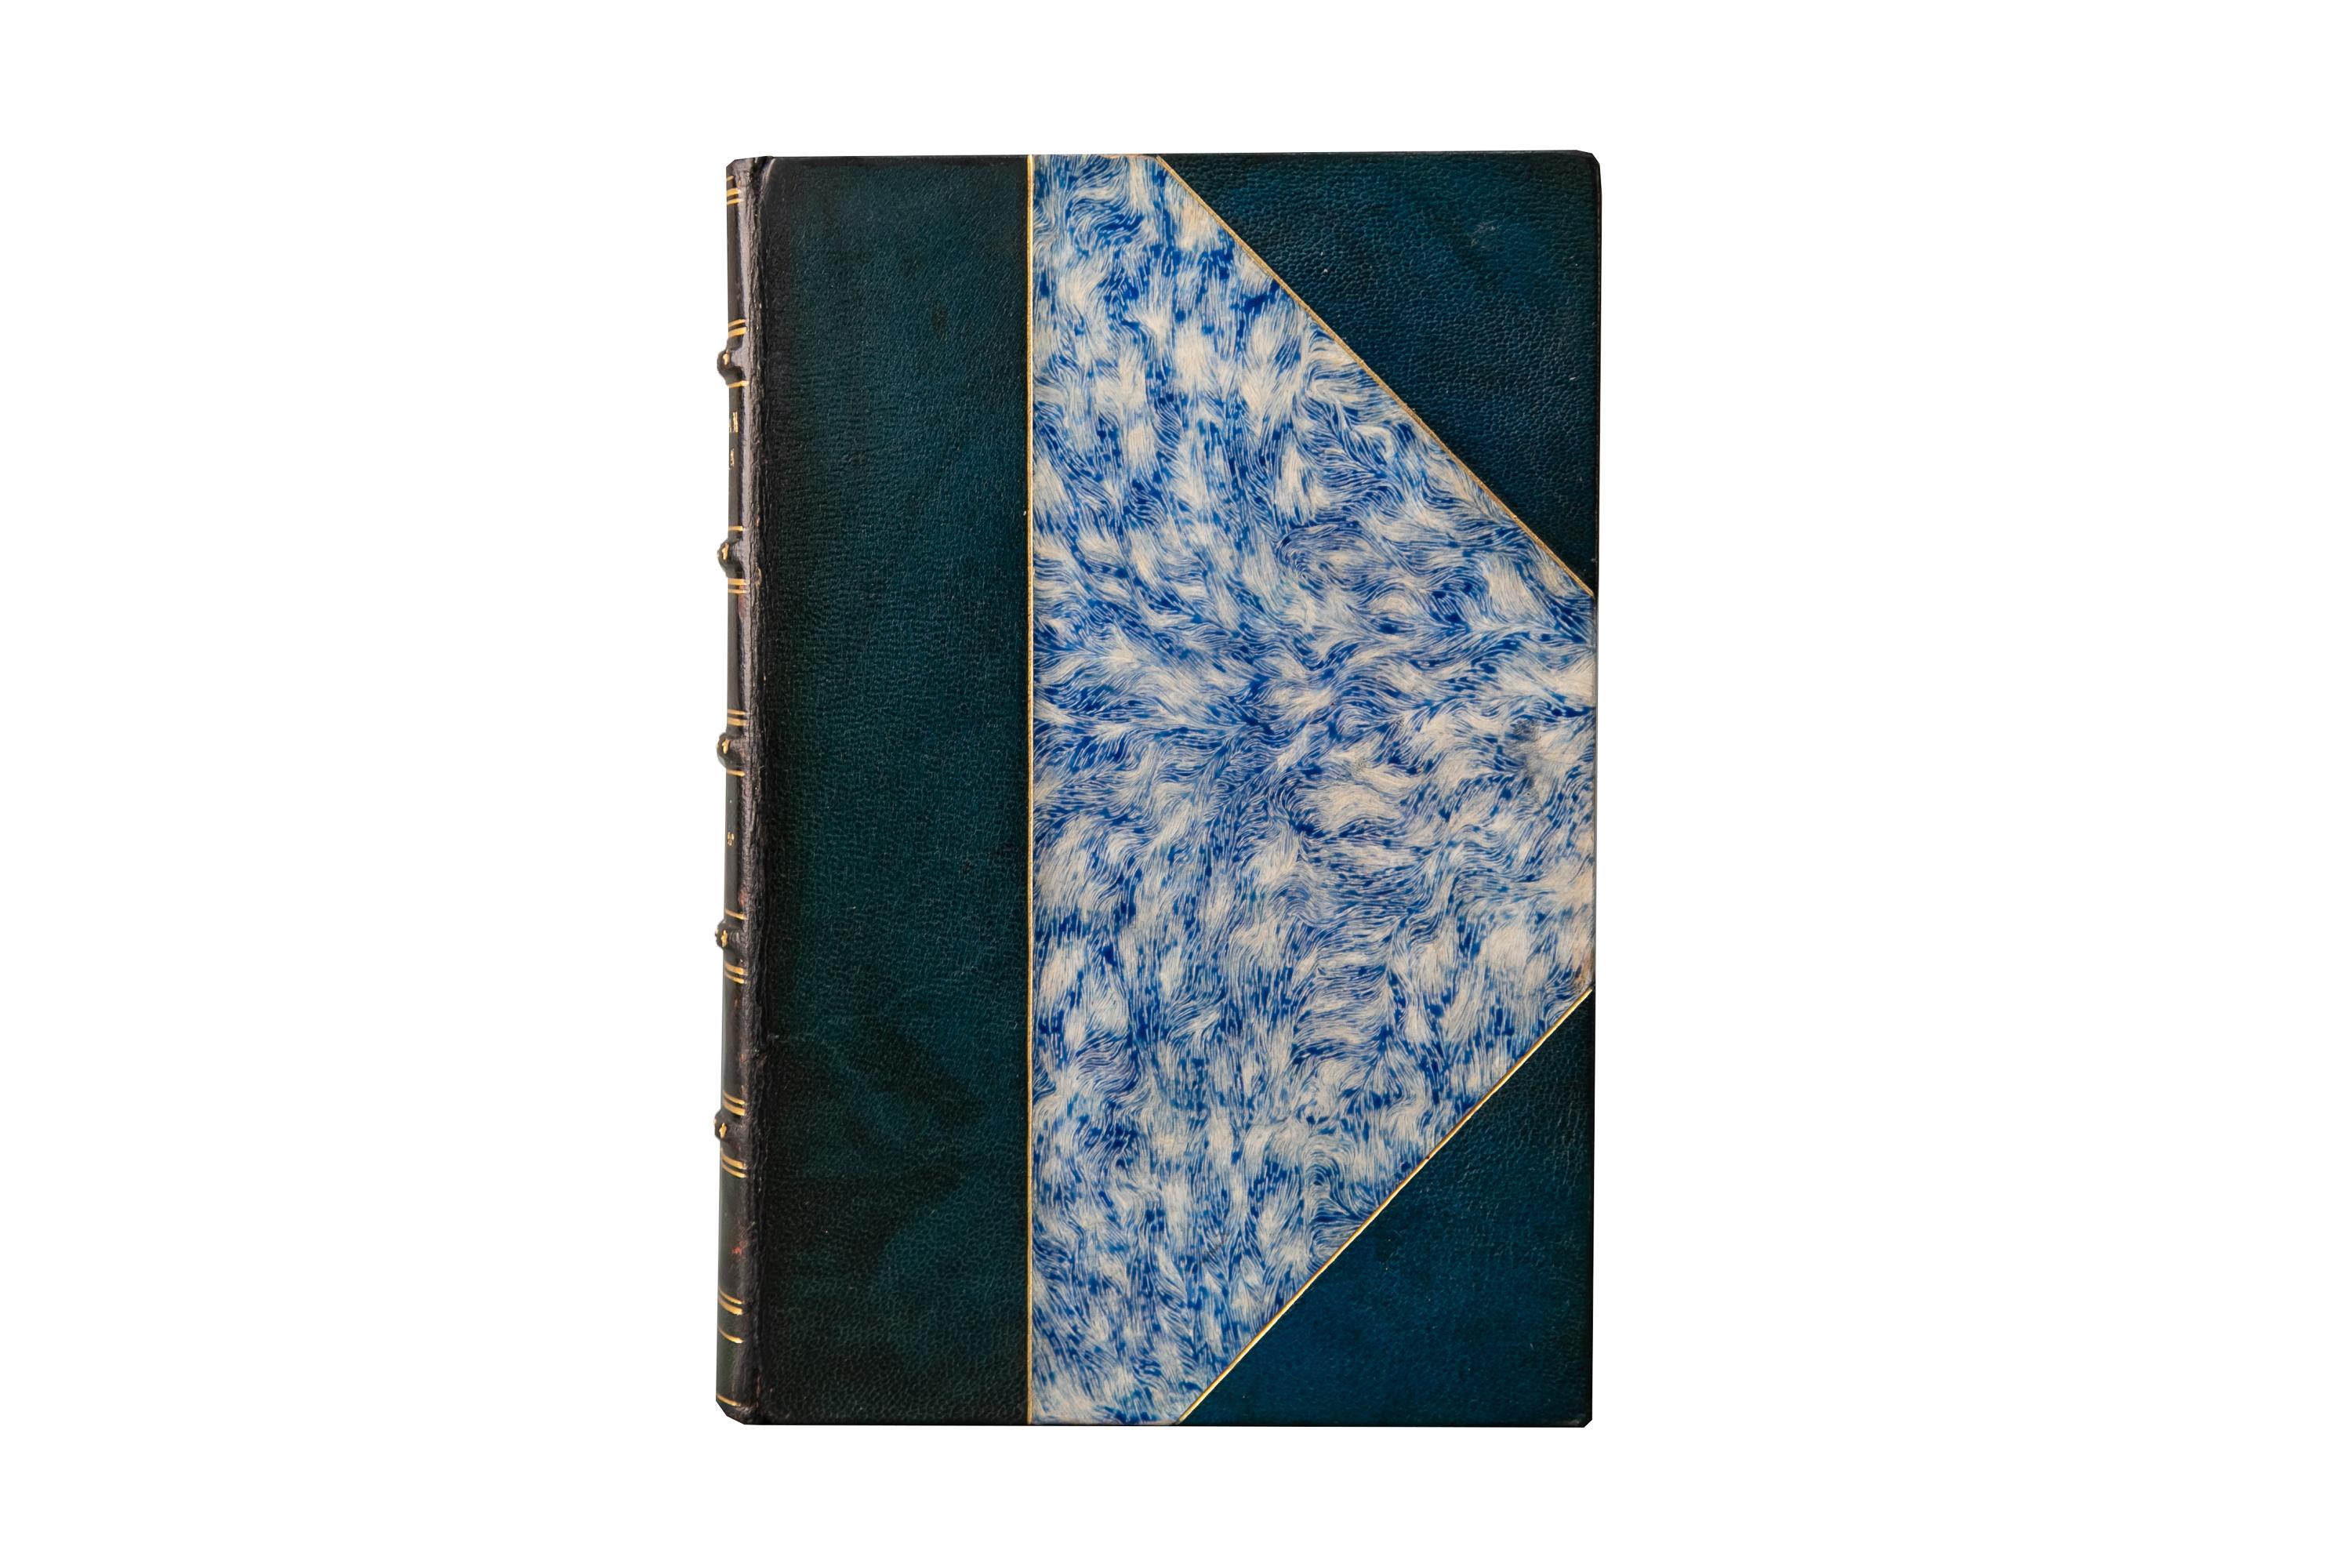 10 Volumes. John G. Nicolay and John Hay, Abraham Lincoln. Bound by Whitman Bennet in 3/4 blue morocco and marbled boards, bordered in gilt-tooling. The spines display raised bands, Americana panel details, and label lettering, all gilt-tooled. The